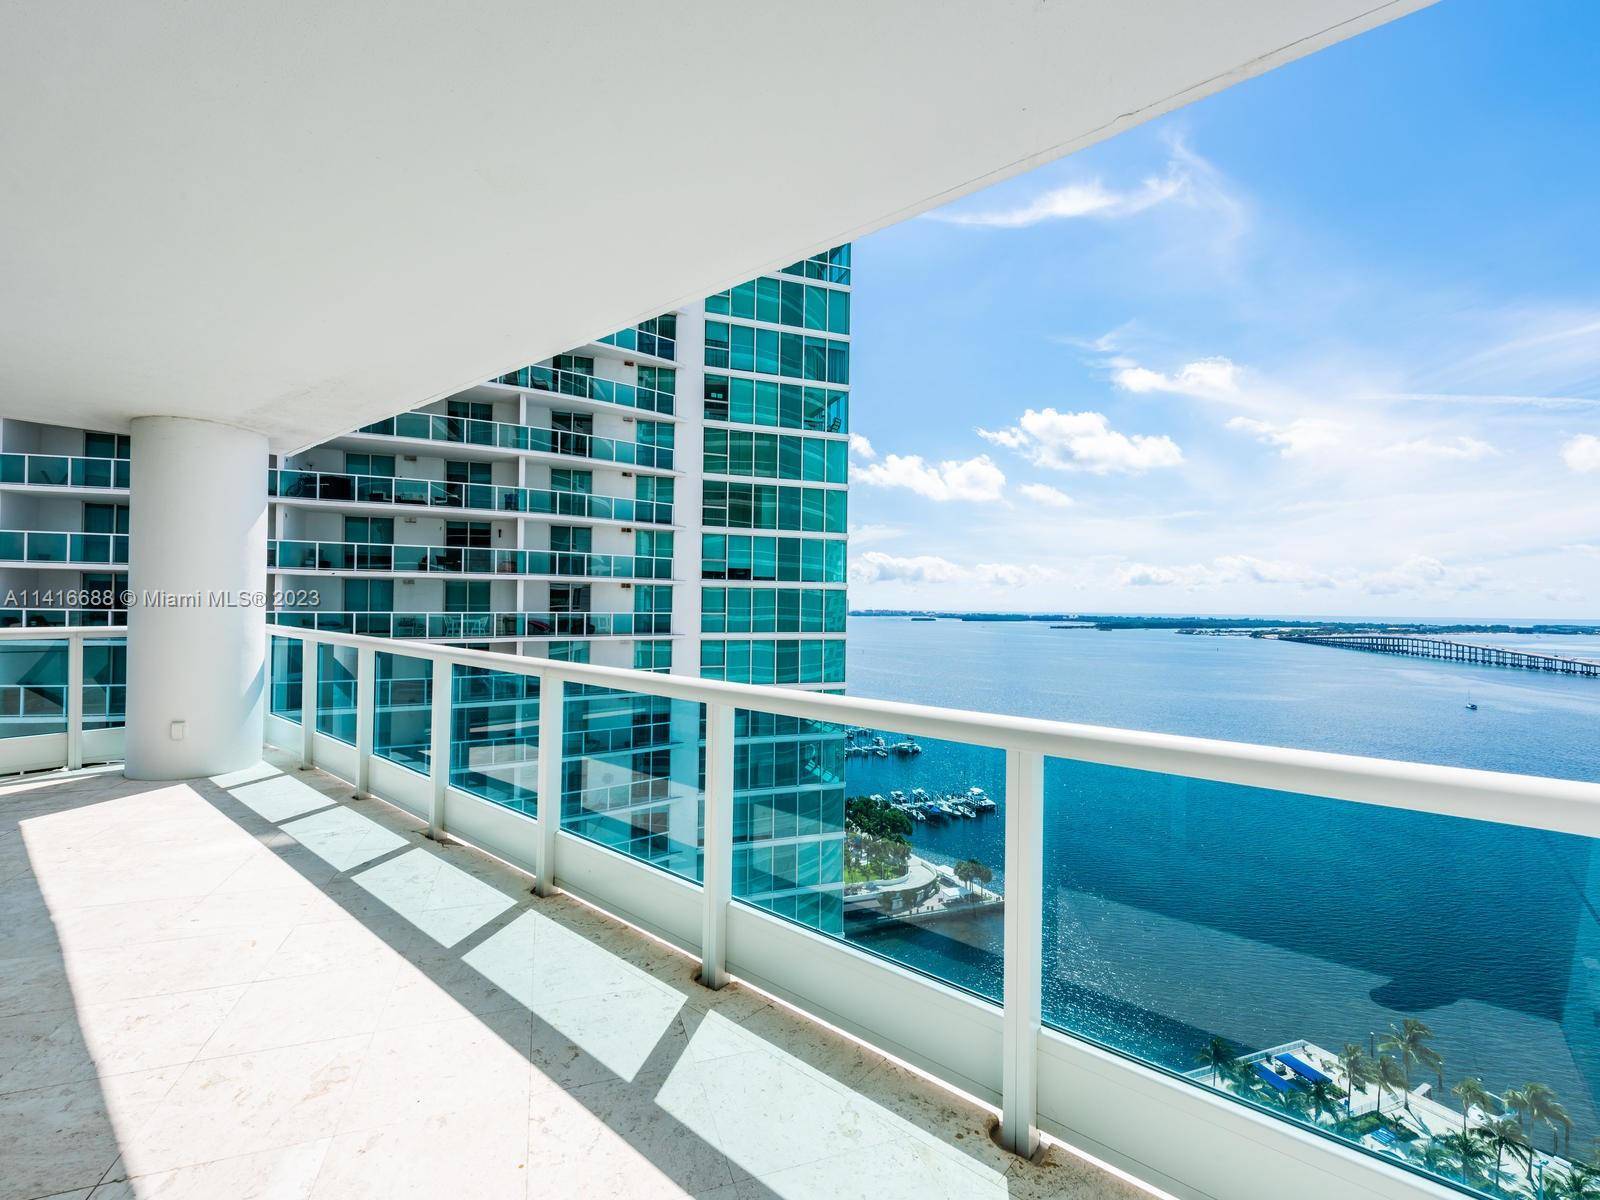 Spectacular unit located at the most prestigious area of Brickell.